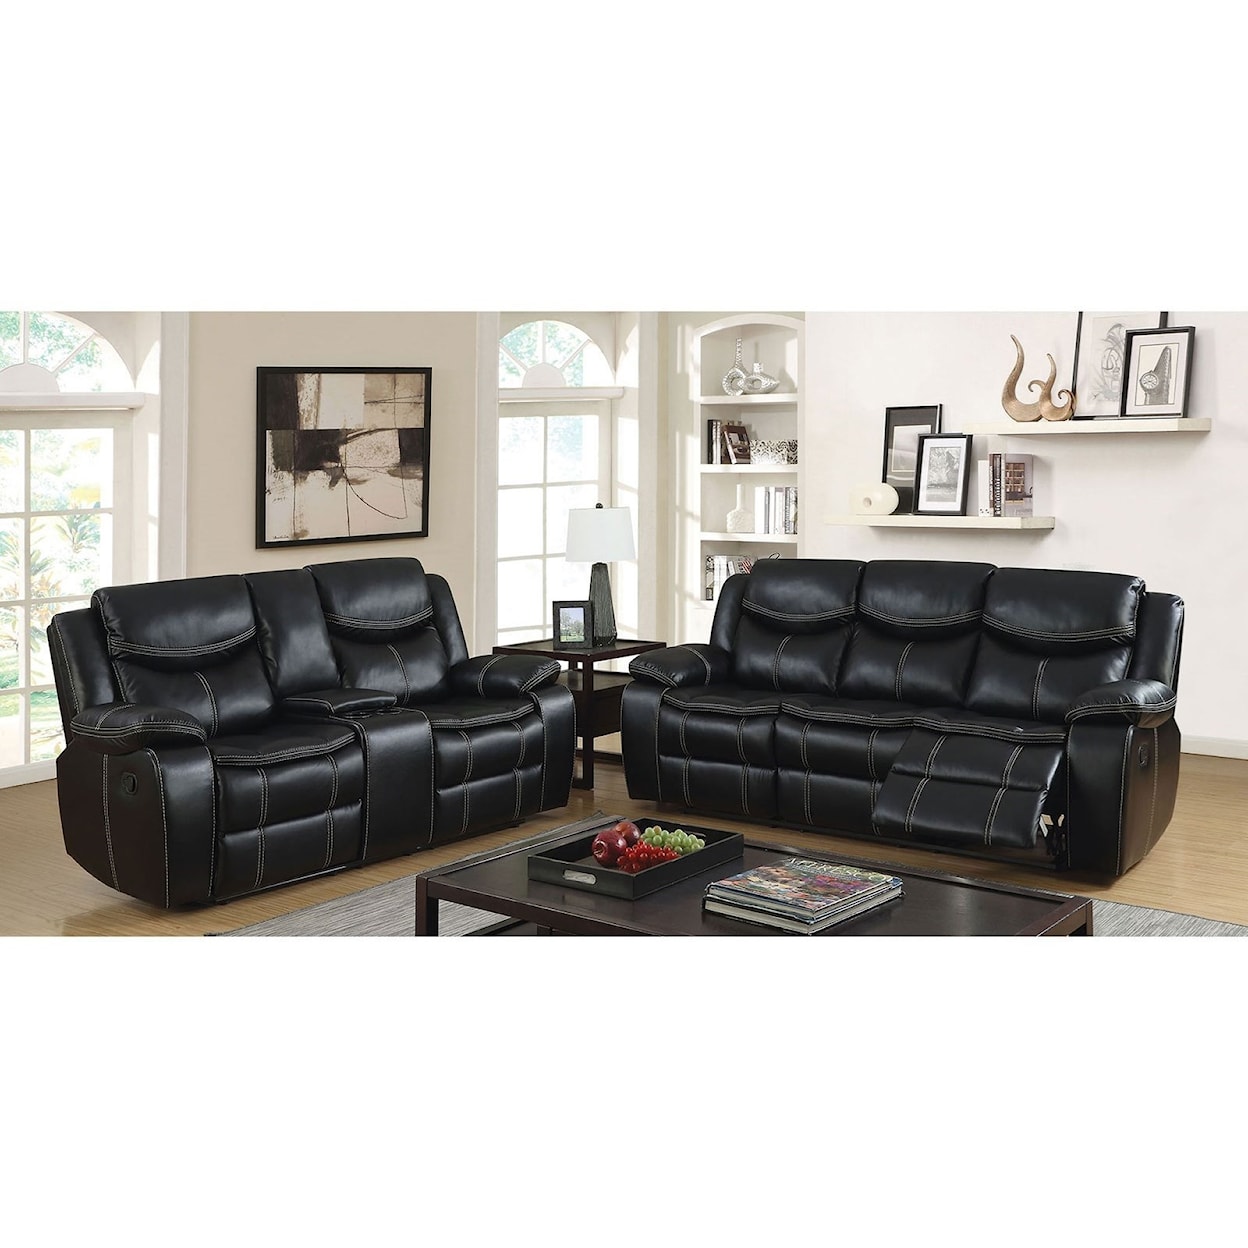 Furniture of America Pollux Reclining Sofa and Loveseat w/ Console Set